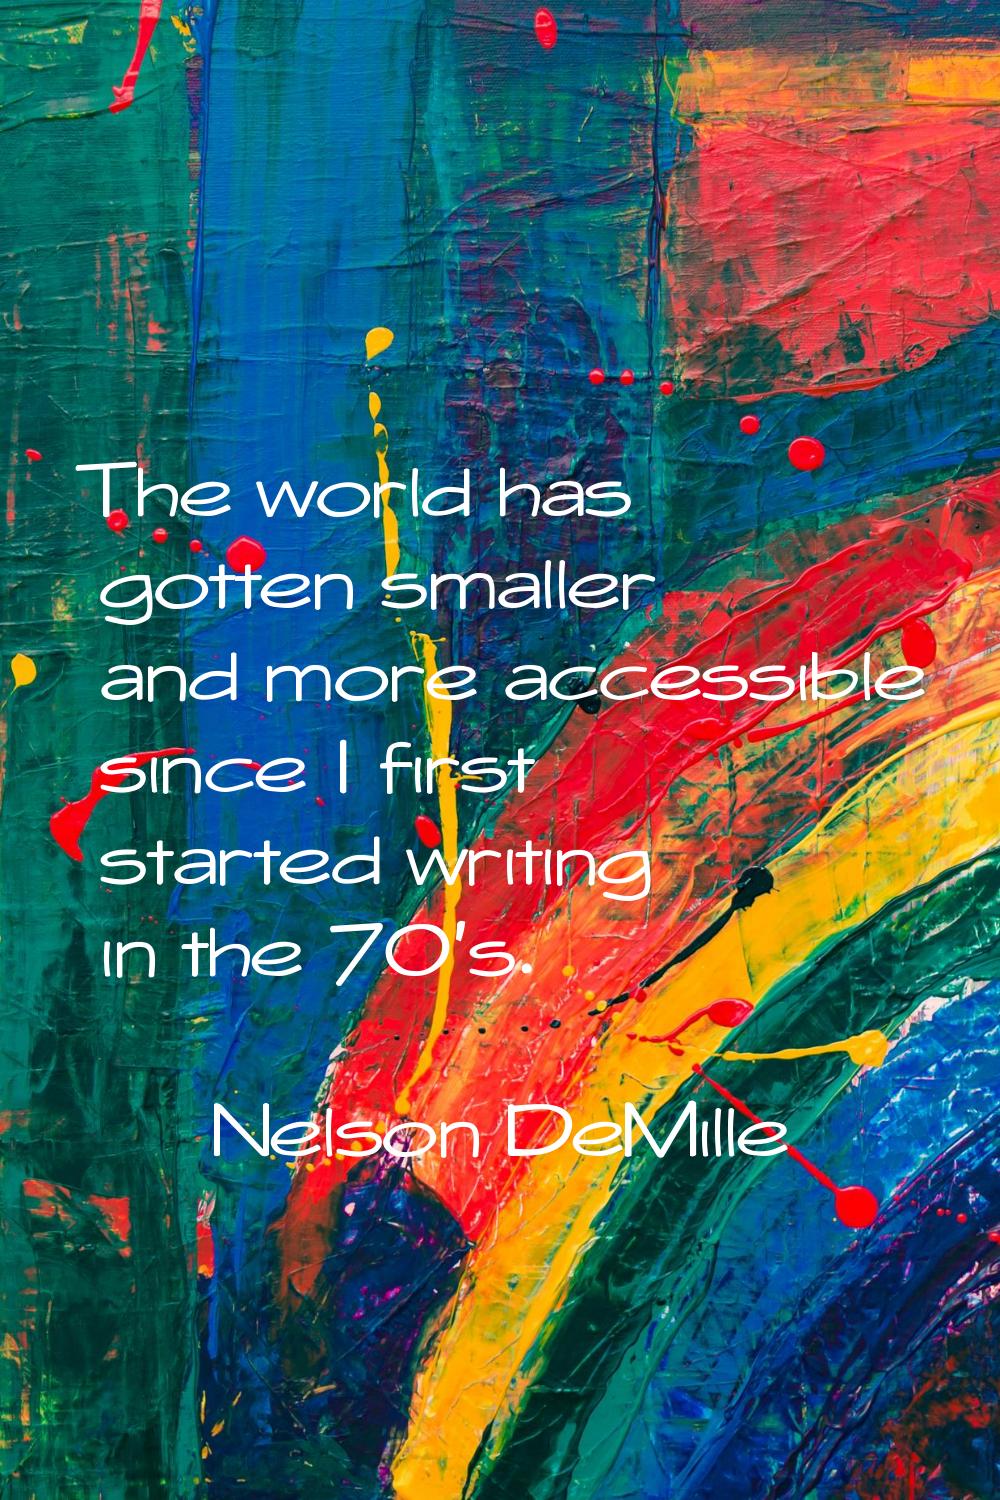 The world has gotten smaller and more accessible since I first started writing in the 70's.